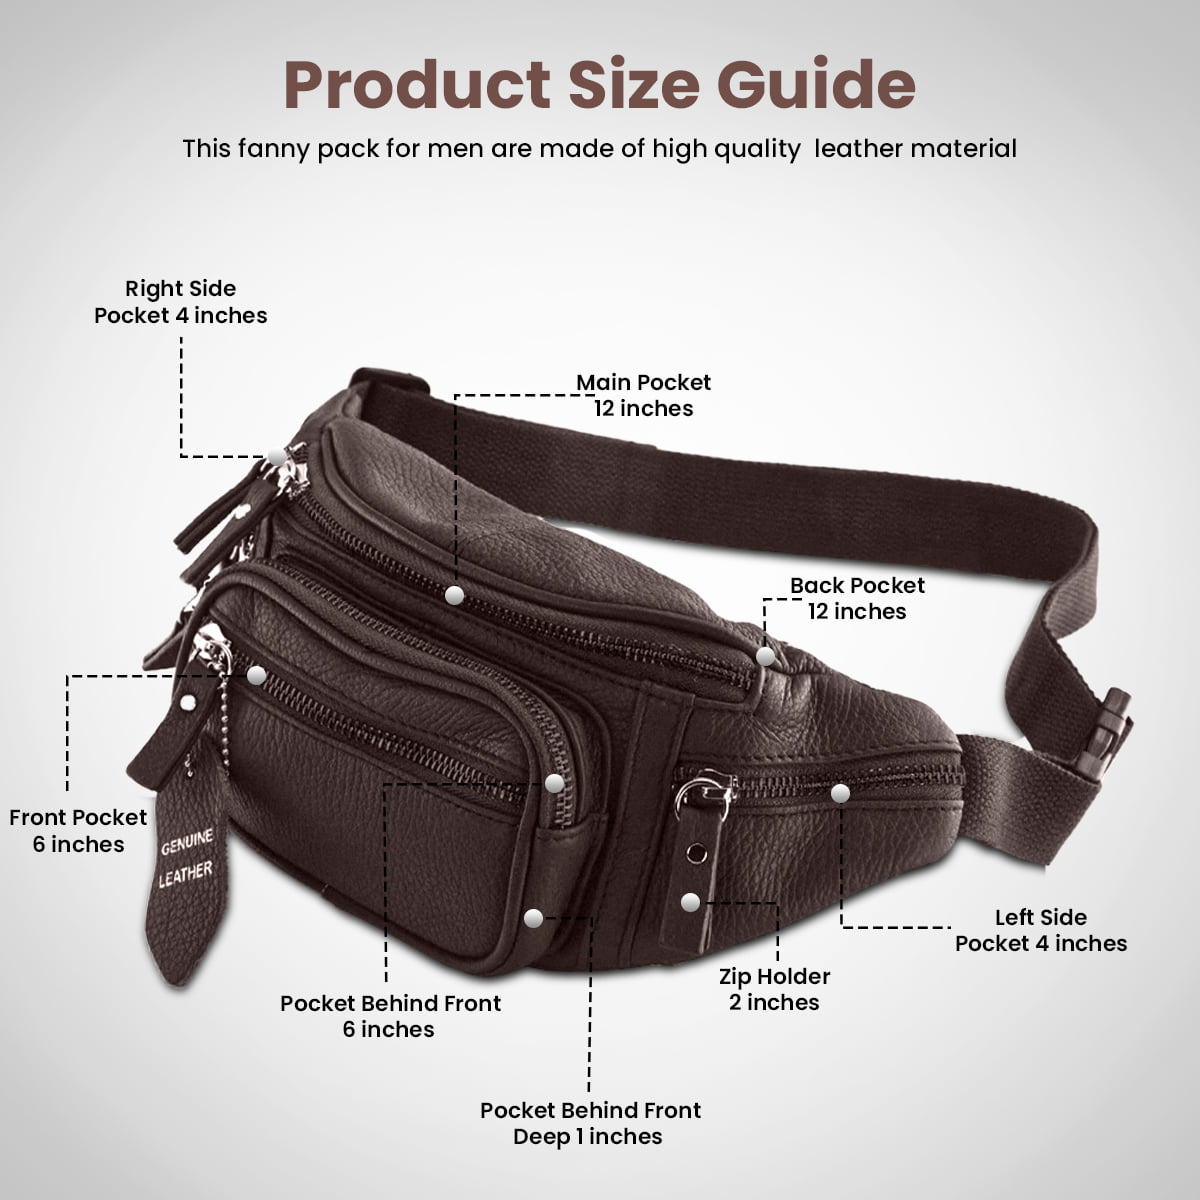 KOMALC Premium Buffalo Leather Fanny Pack Waist Multifunction Hip Bum Bag  Travel Pouch for women and men- Adjustable with Multiple Pockets & Sturdy